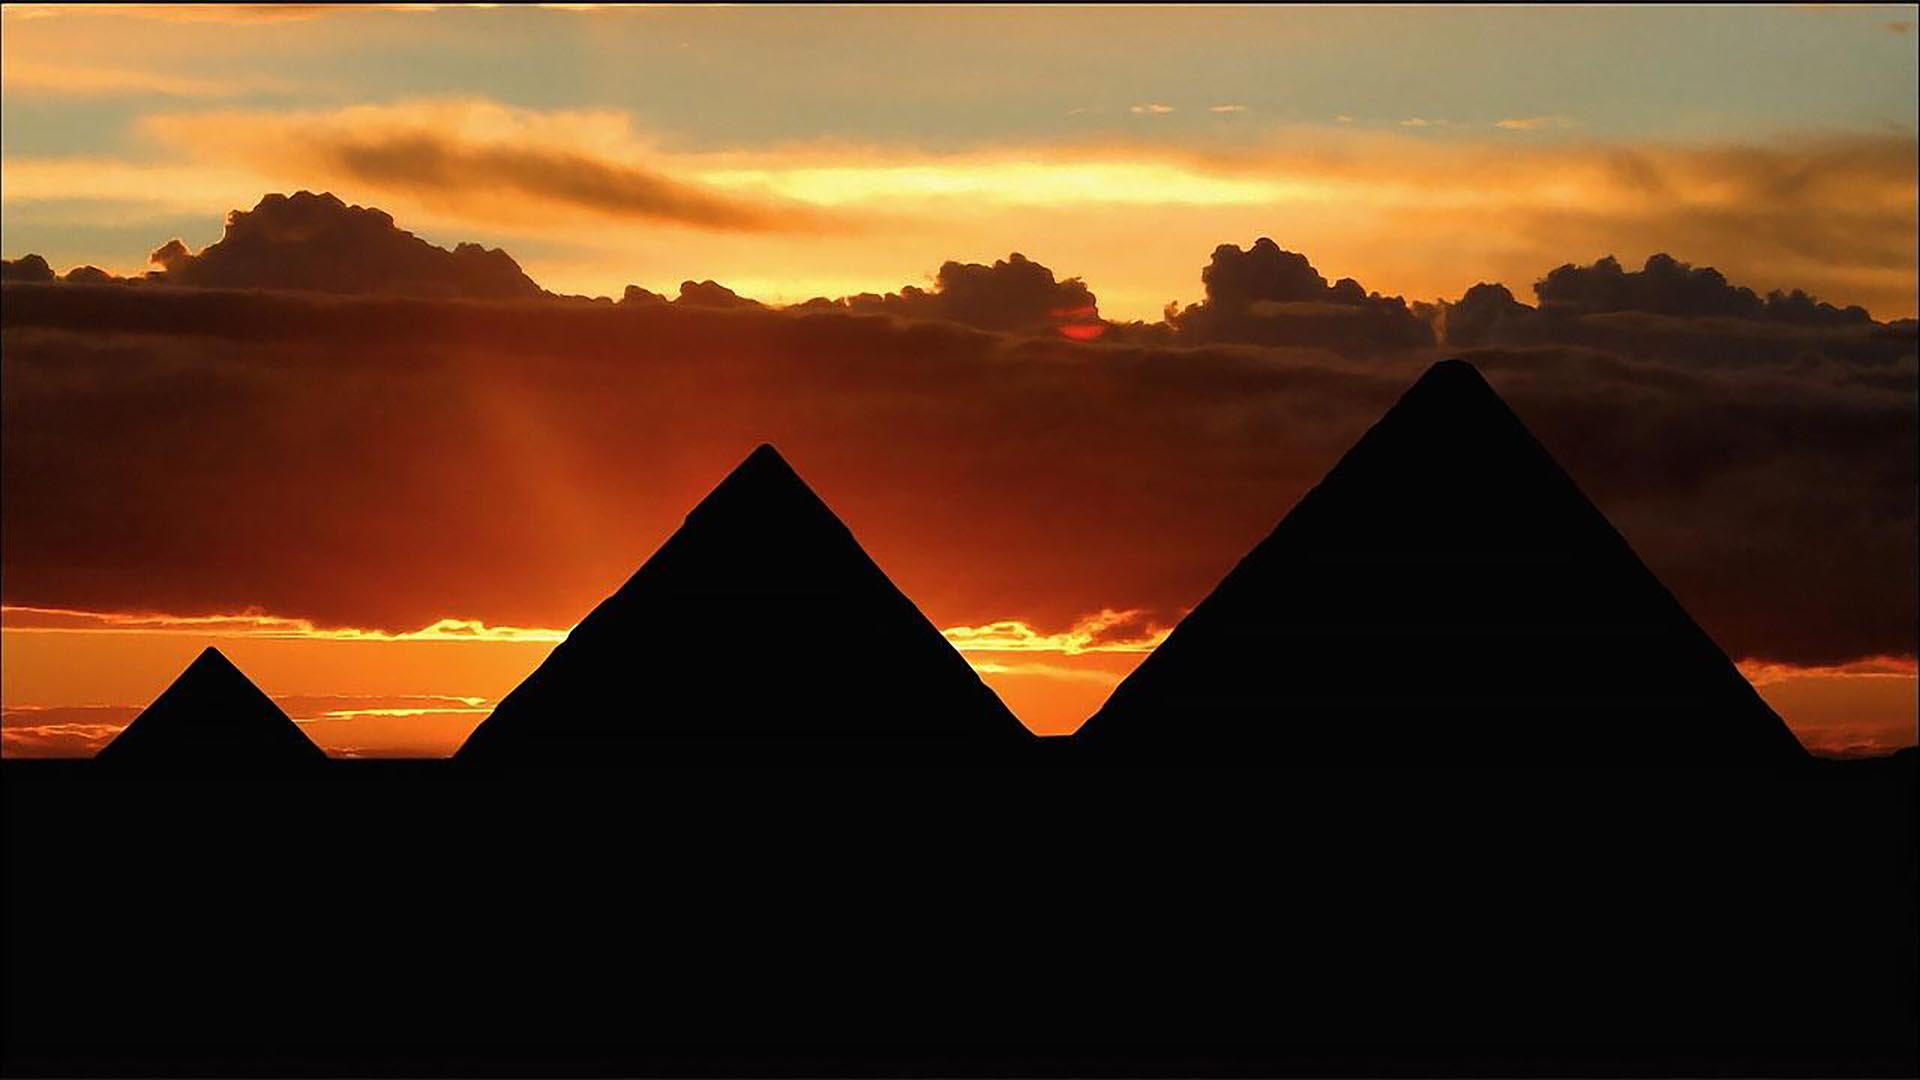 Silhouettes of three pyramids at sunset.